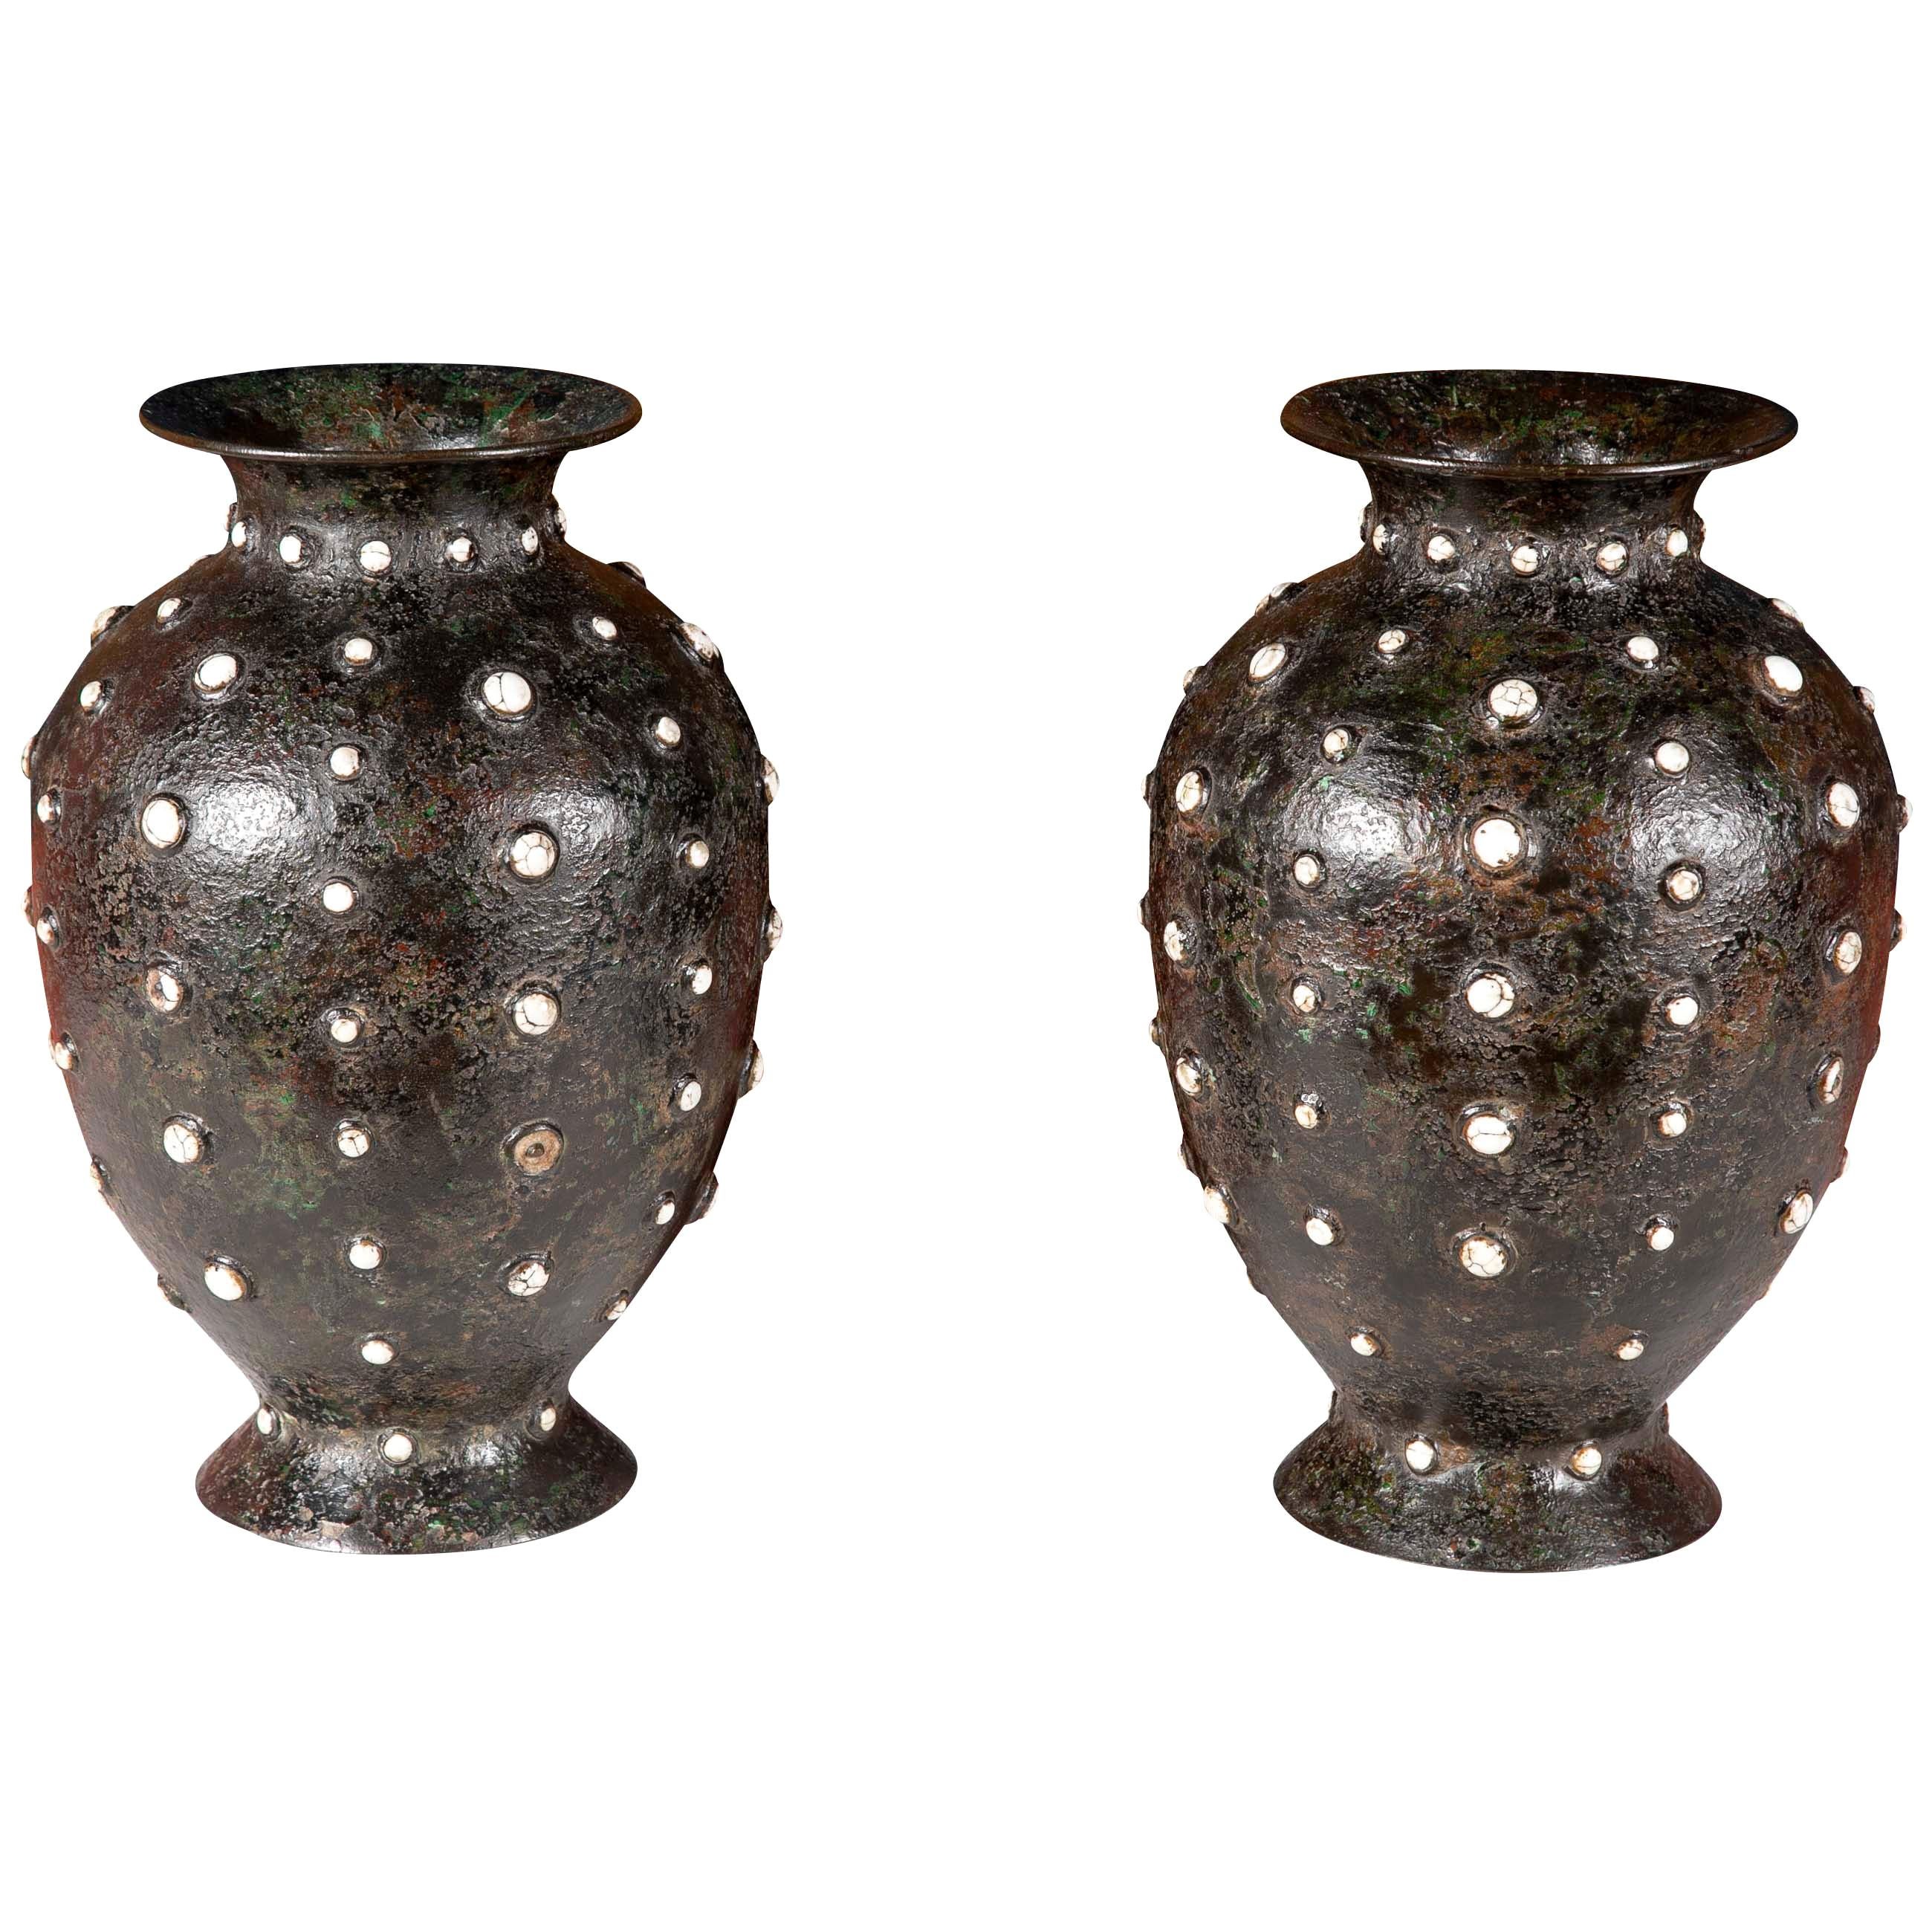 Pair of 19th Century Chinese Bronze and Enamel Studded Vases